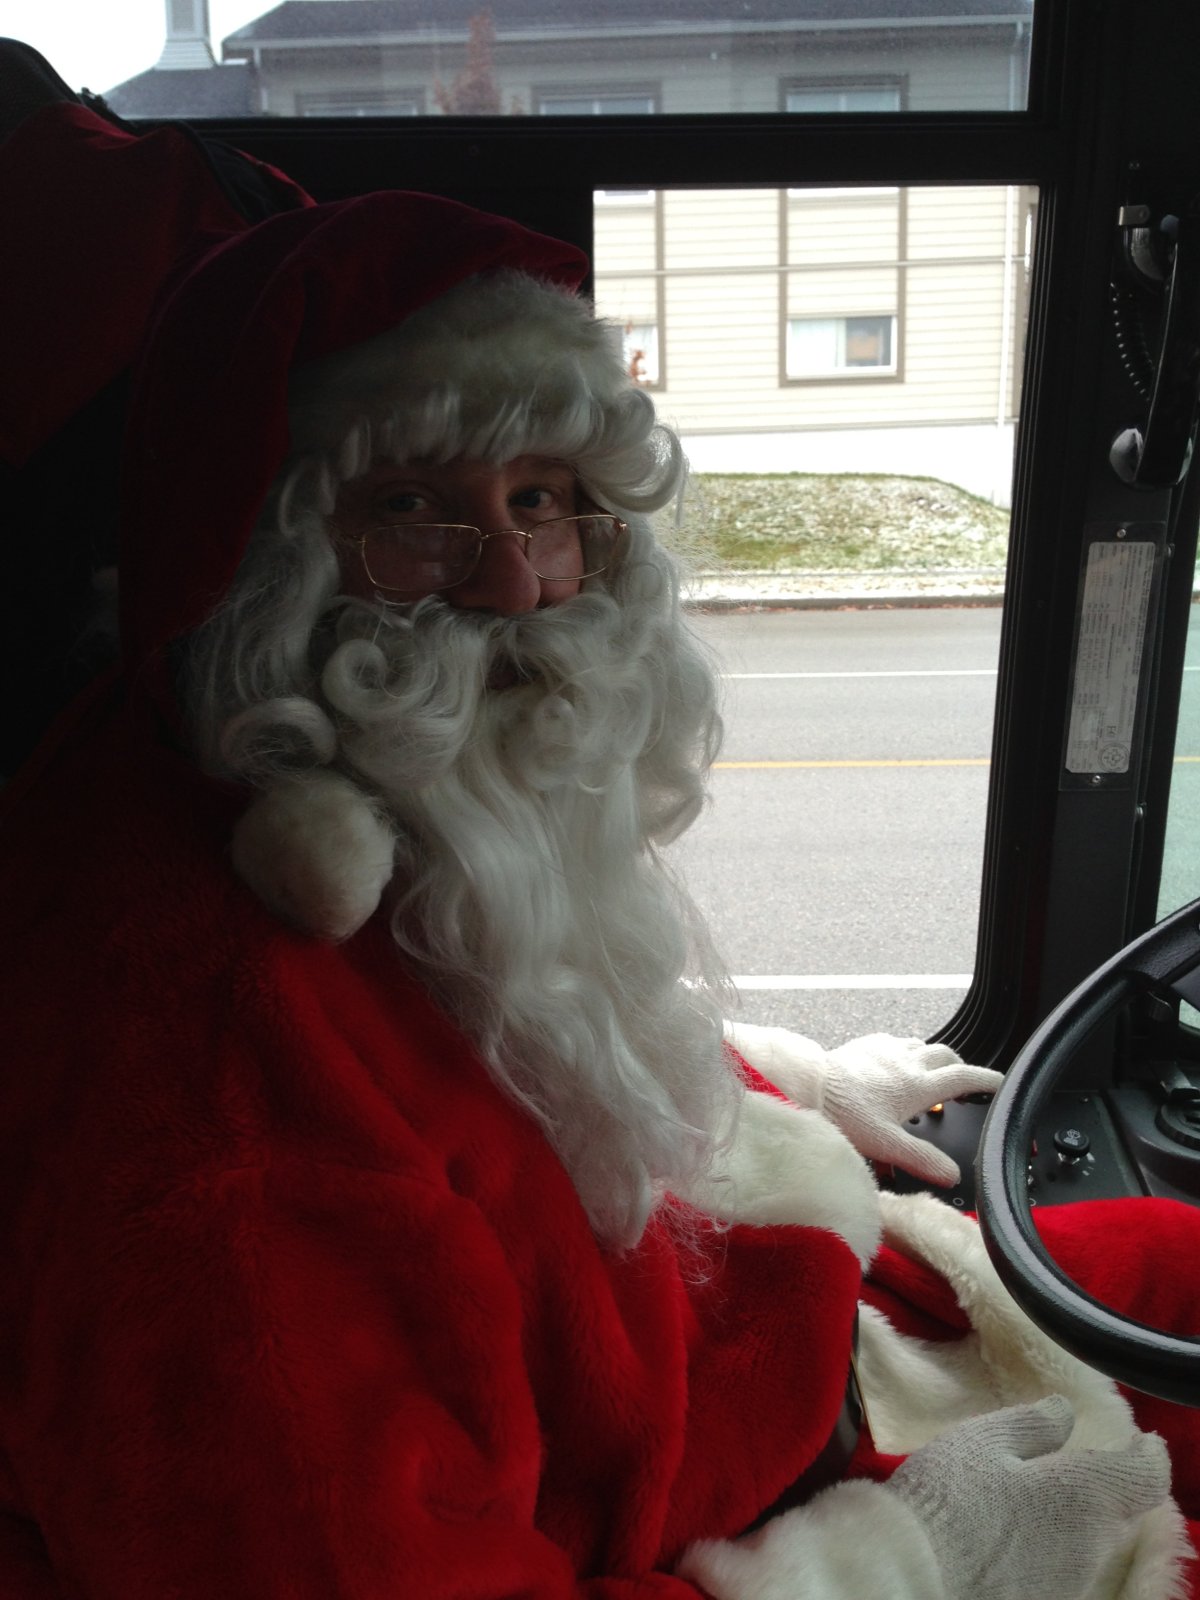 Change of heart: Burnaby bus driver can keep wearing his Santa suit, says employer - image